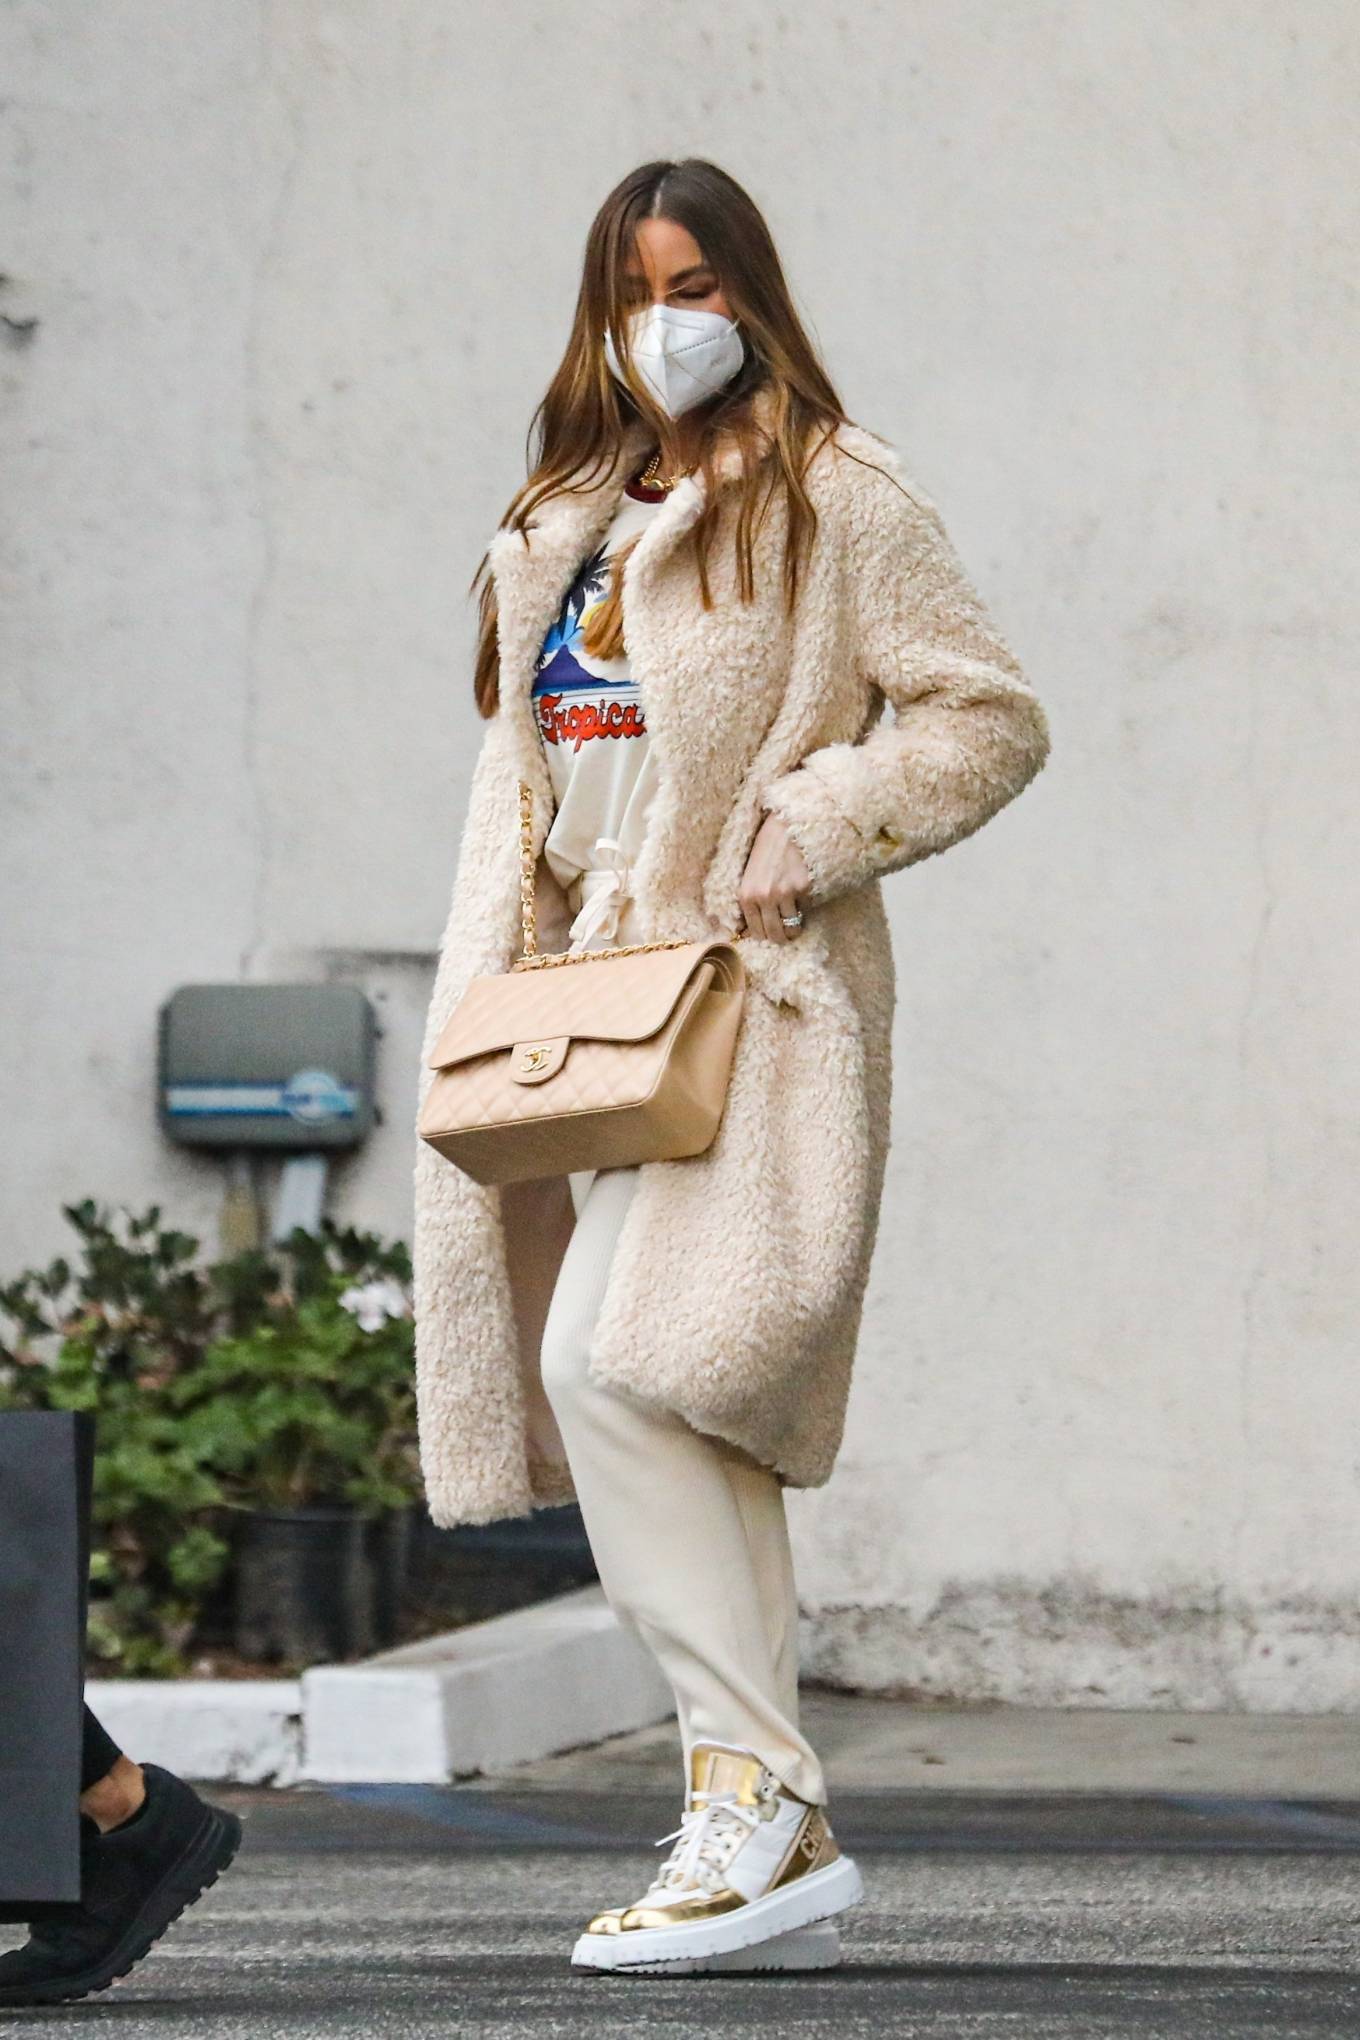 Sofia Vergara - Wears a beige shearling coat while out shopping in Beverly Hills